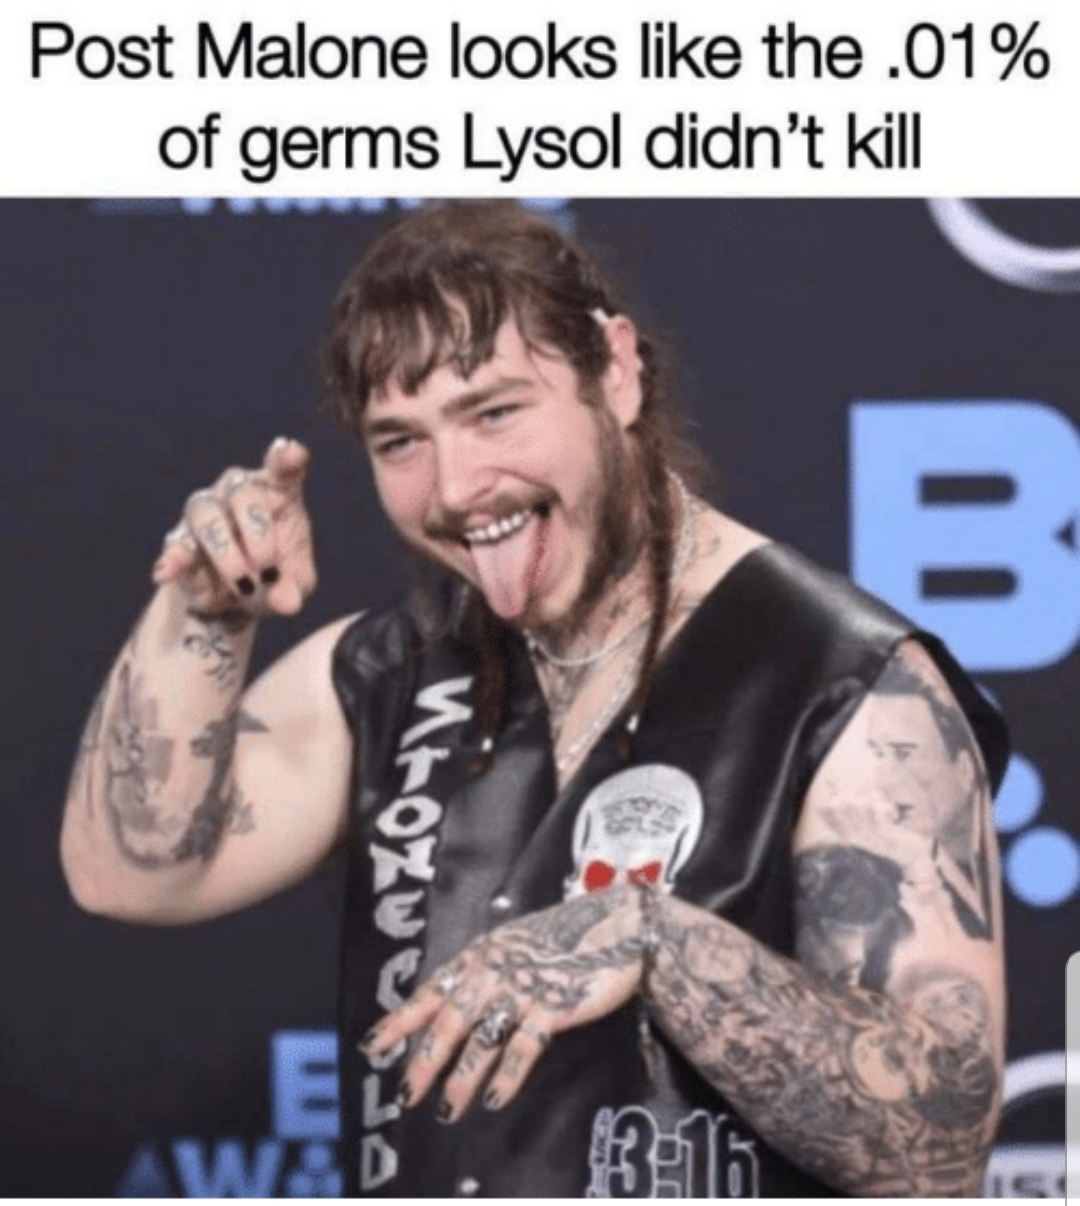 post malone meme - Post Malone looks the .01% of germs Lysol didn't kill Neomu sa